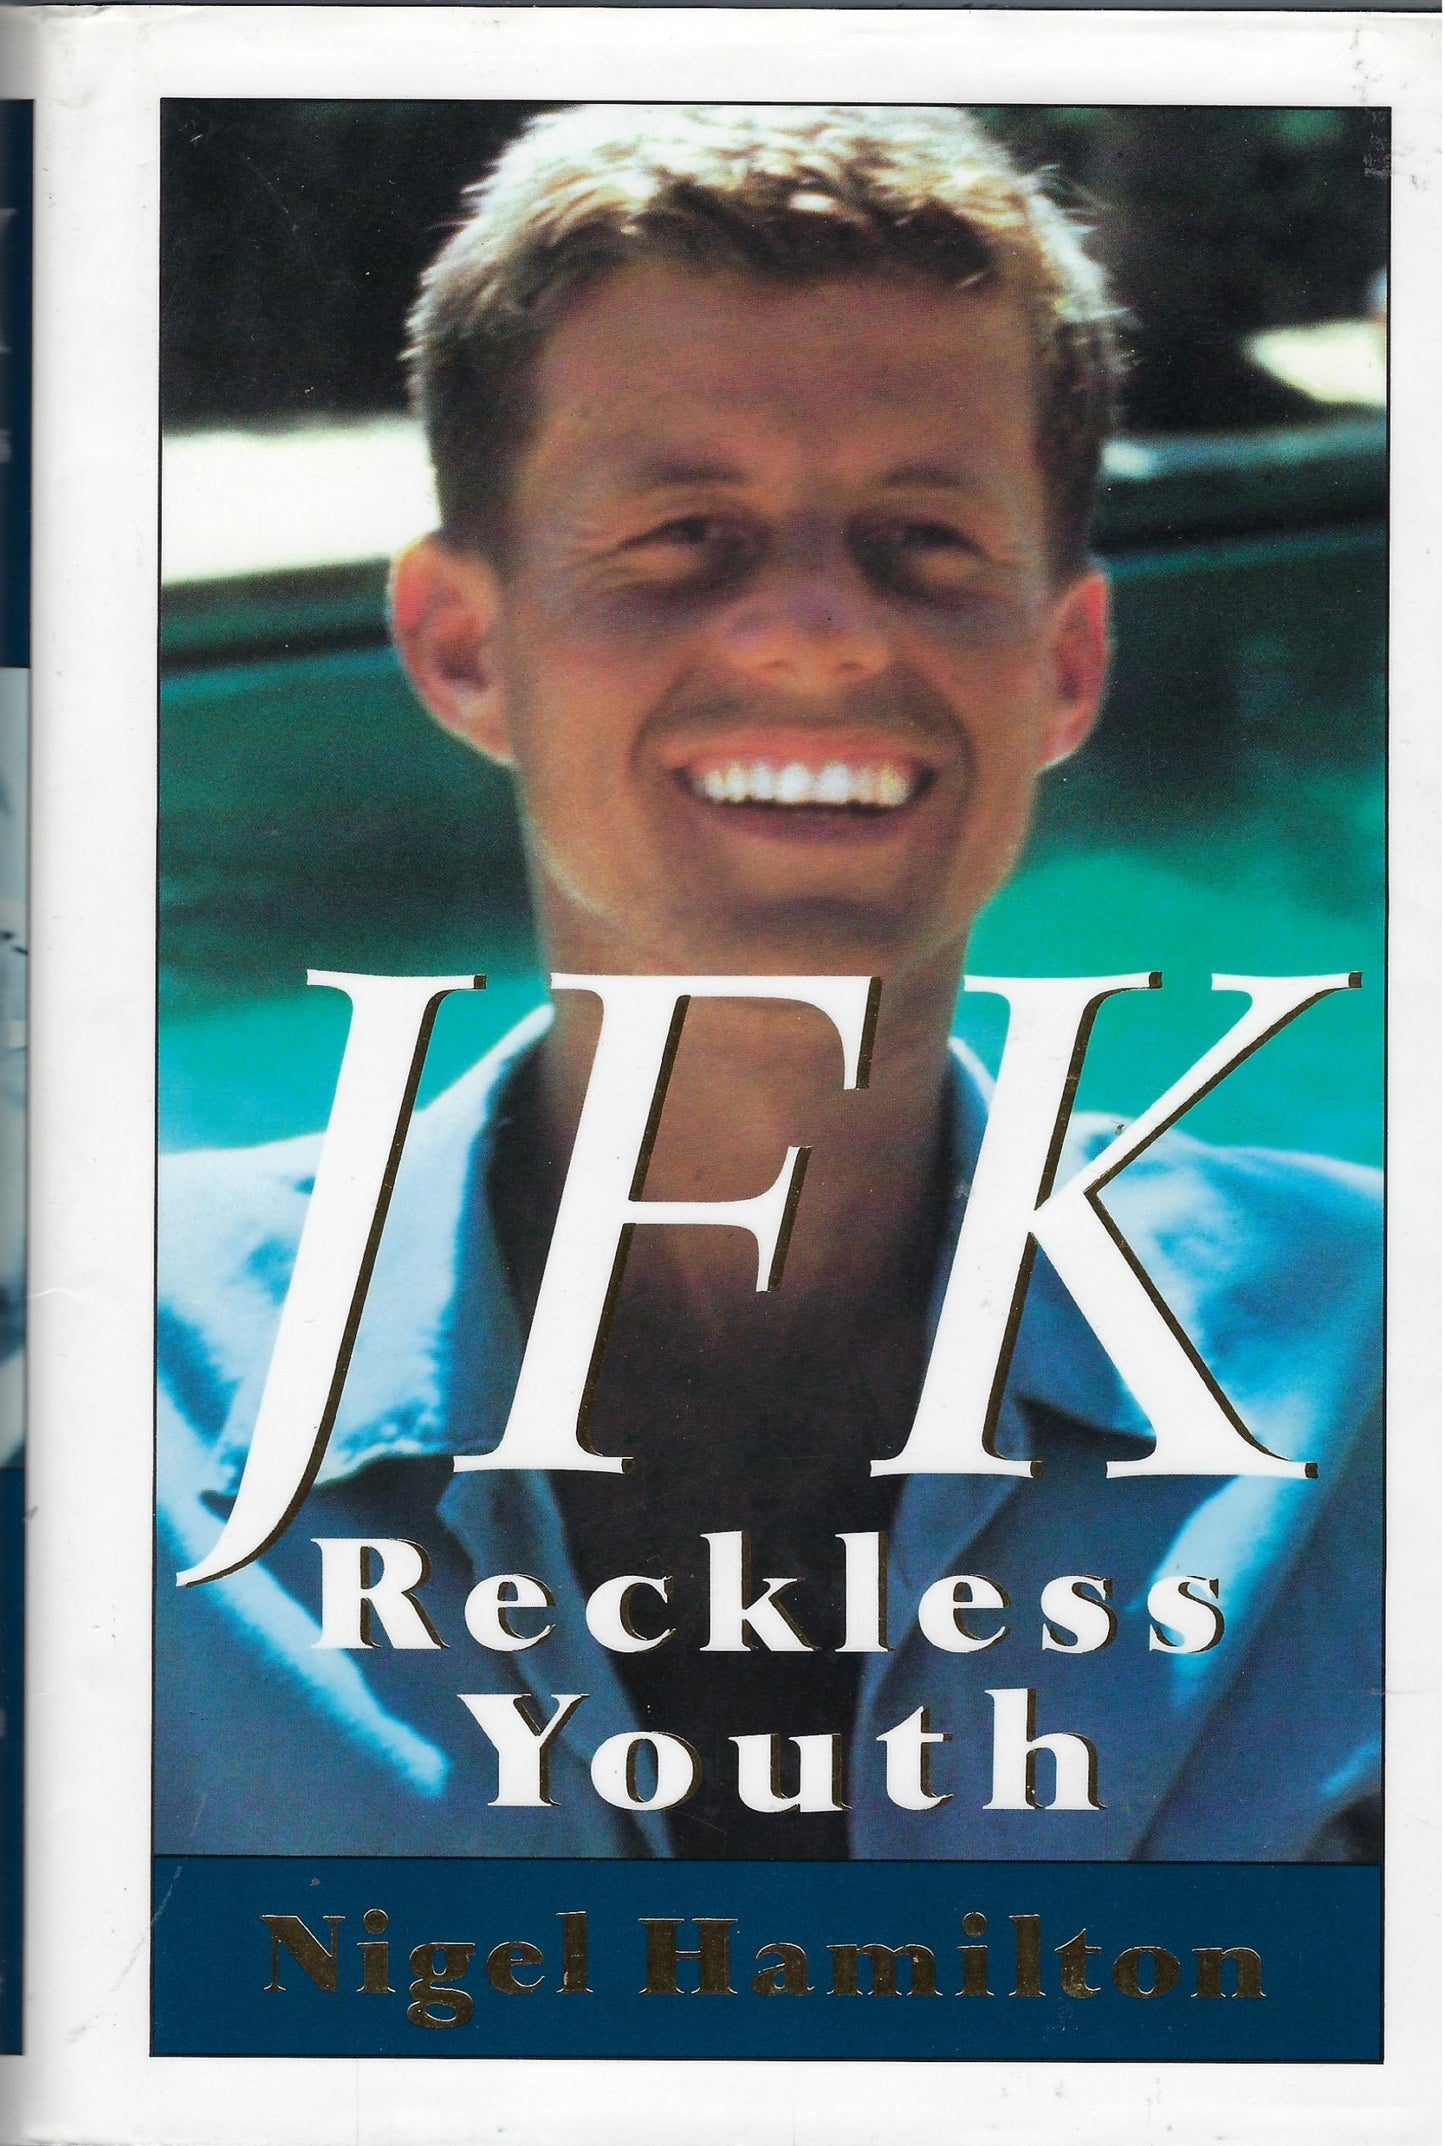 JFK Reckless youth